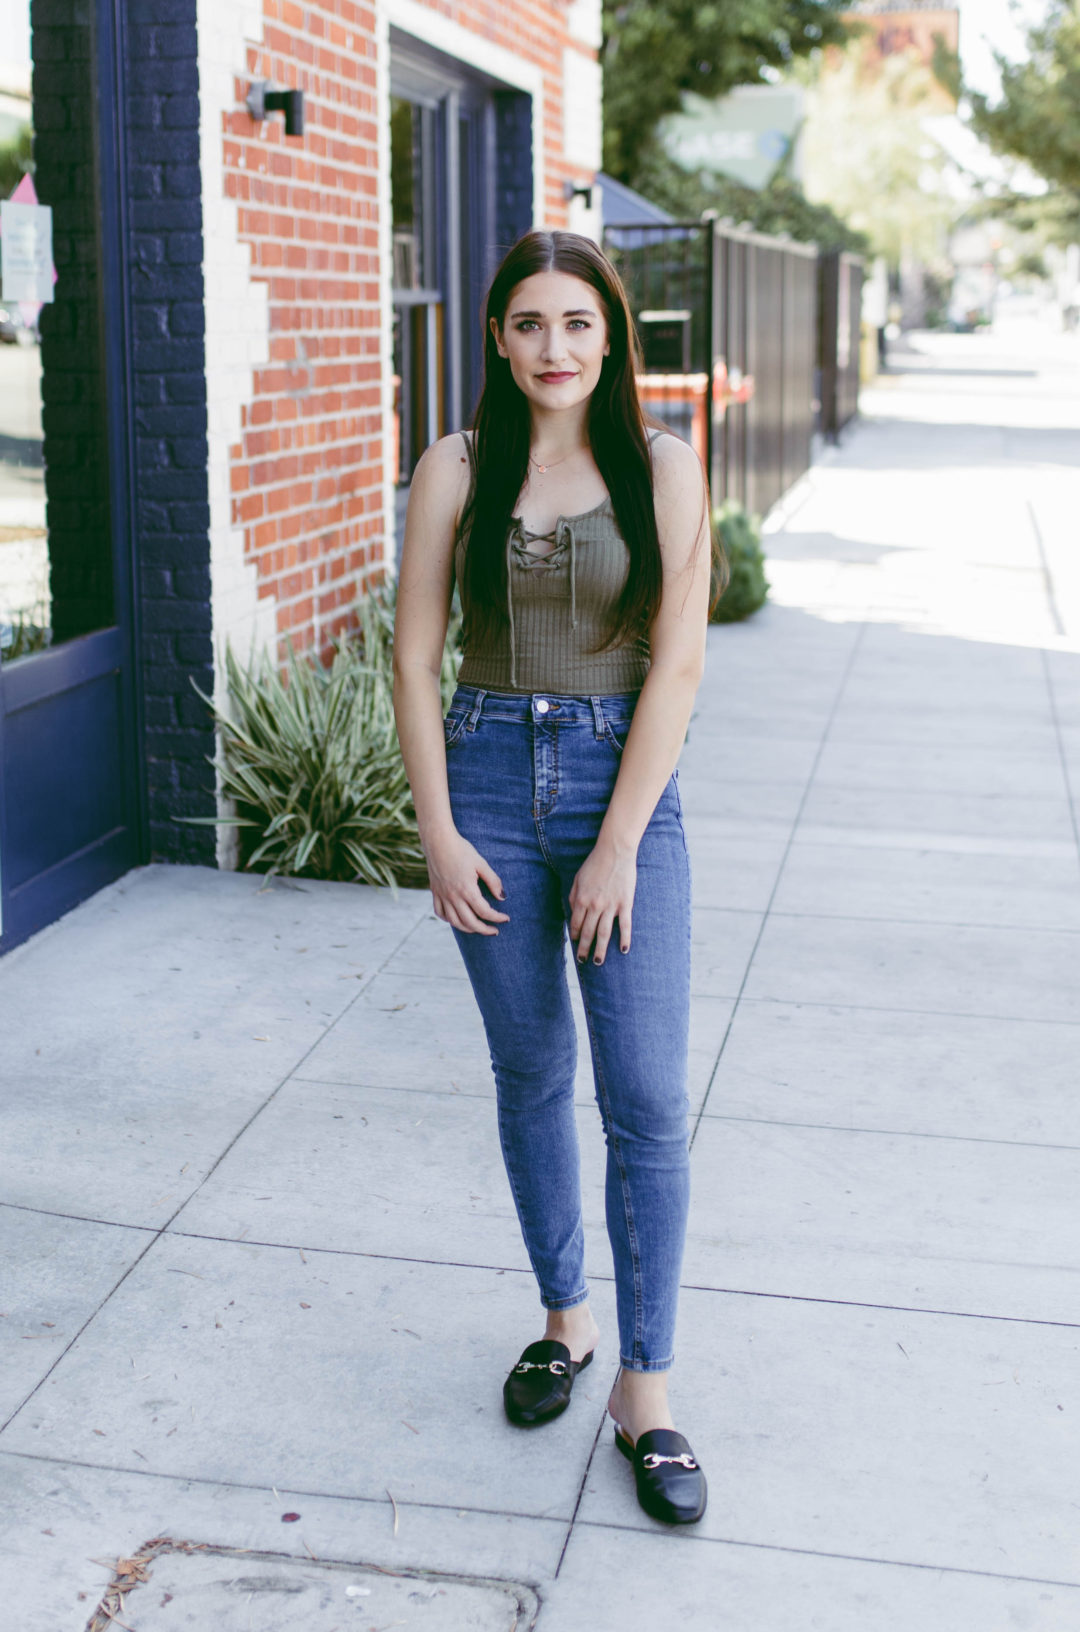 Easy Transition To Fall Style | Twinspiration